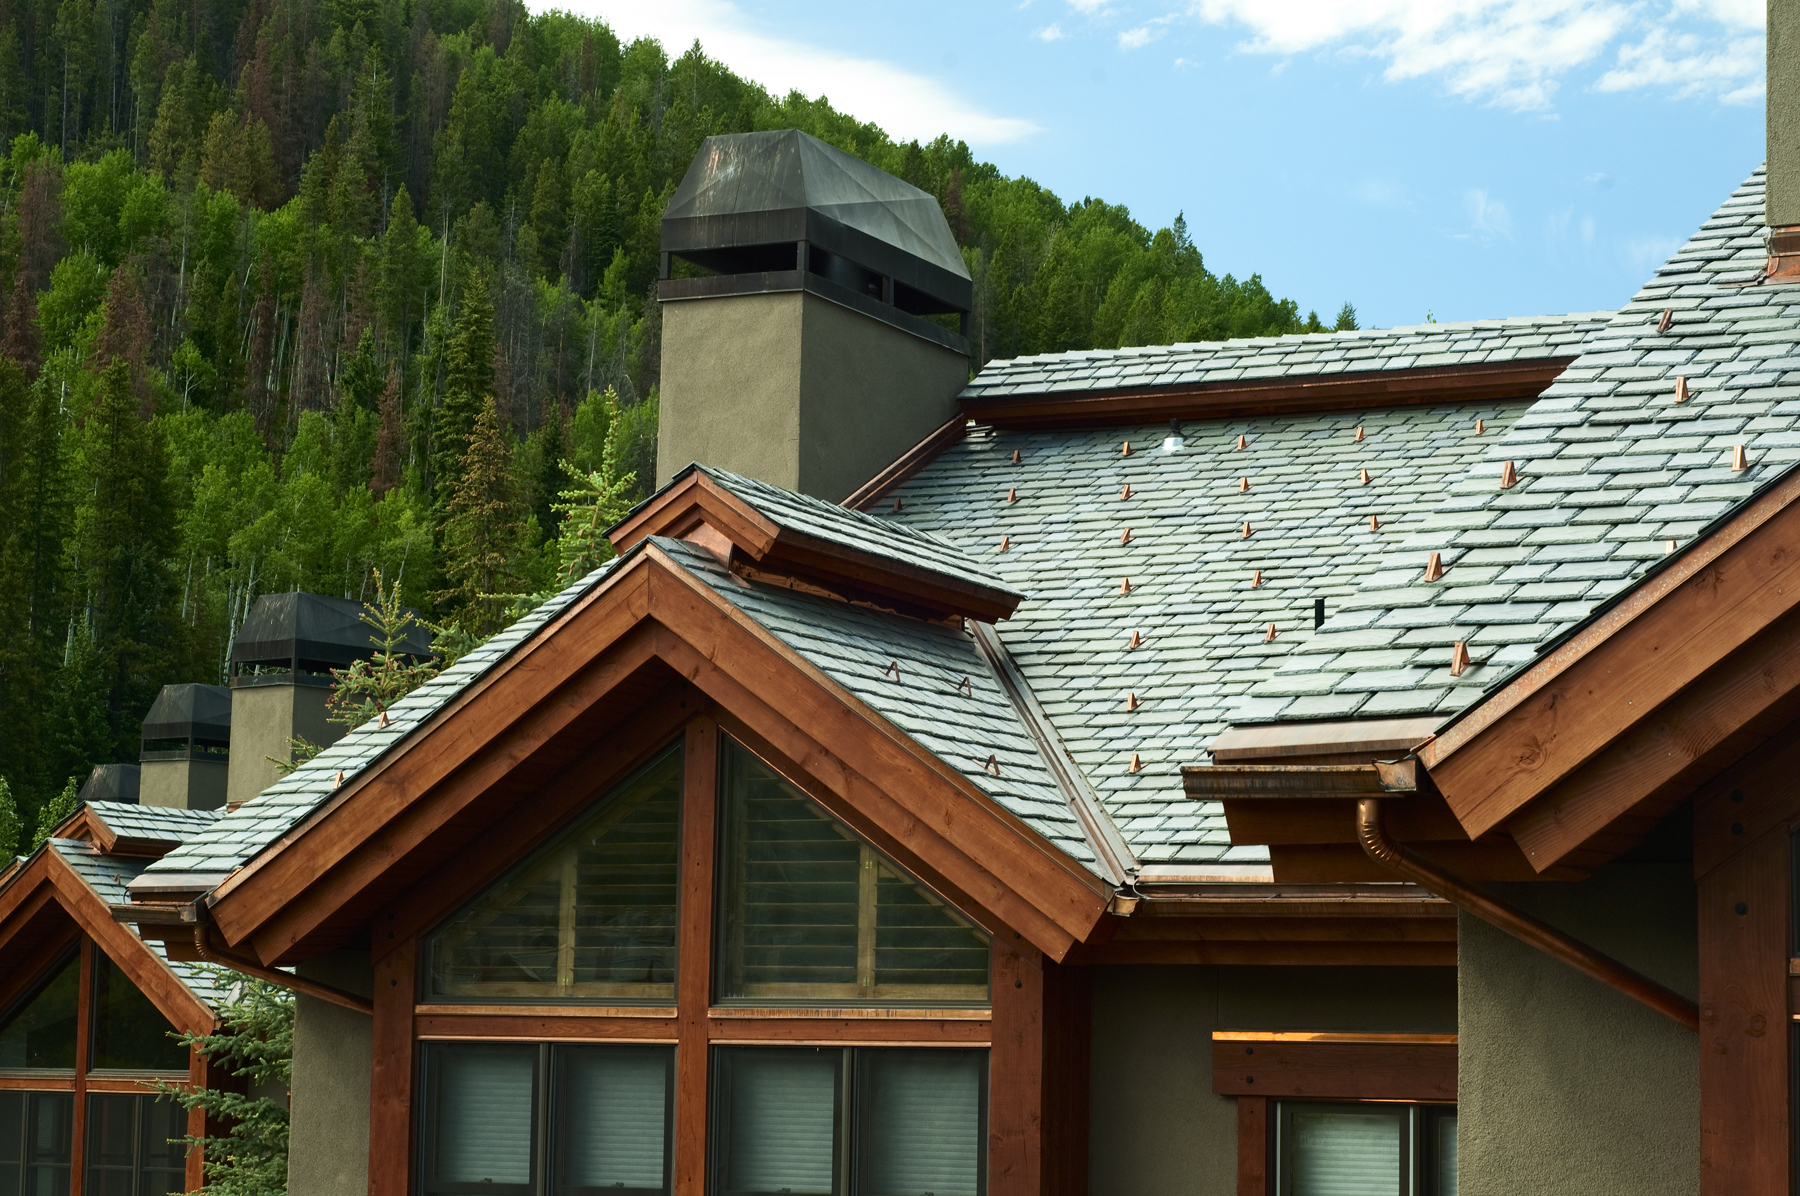 DaVinci polymer roofing tiles with blue in the color blend mixture complements this mountain setting.